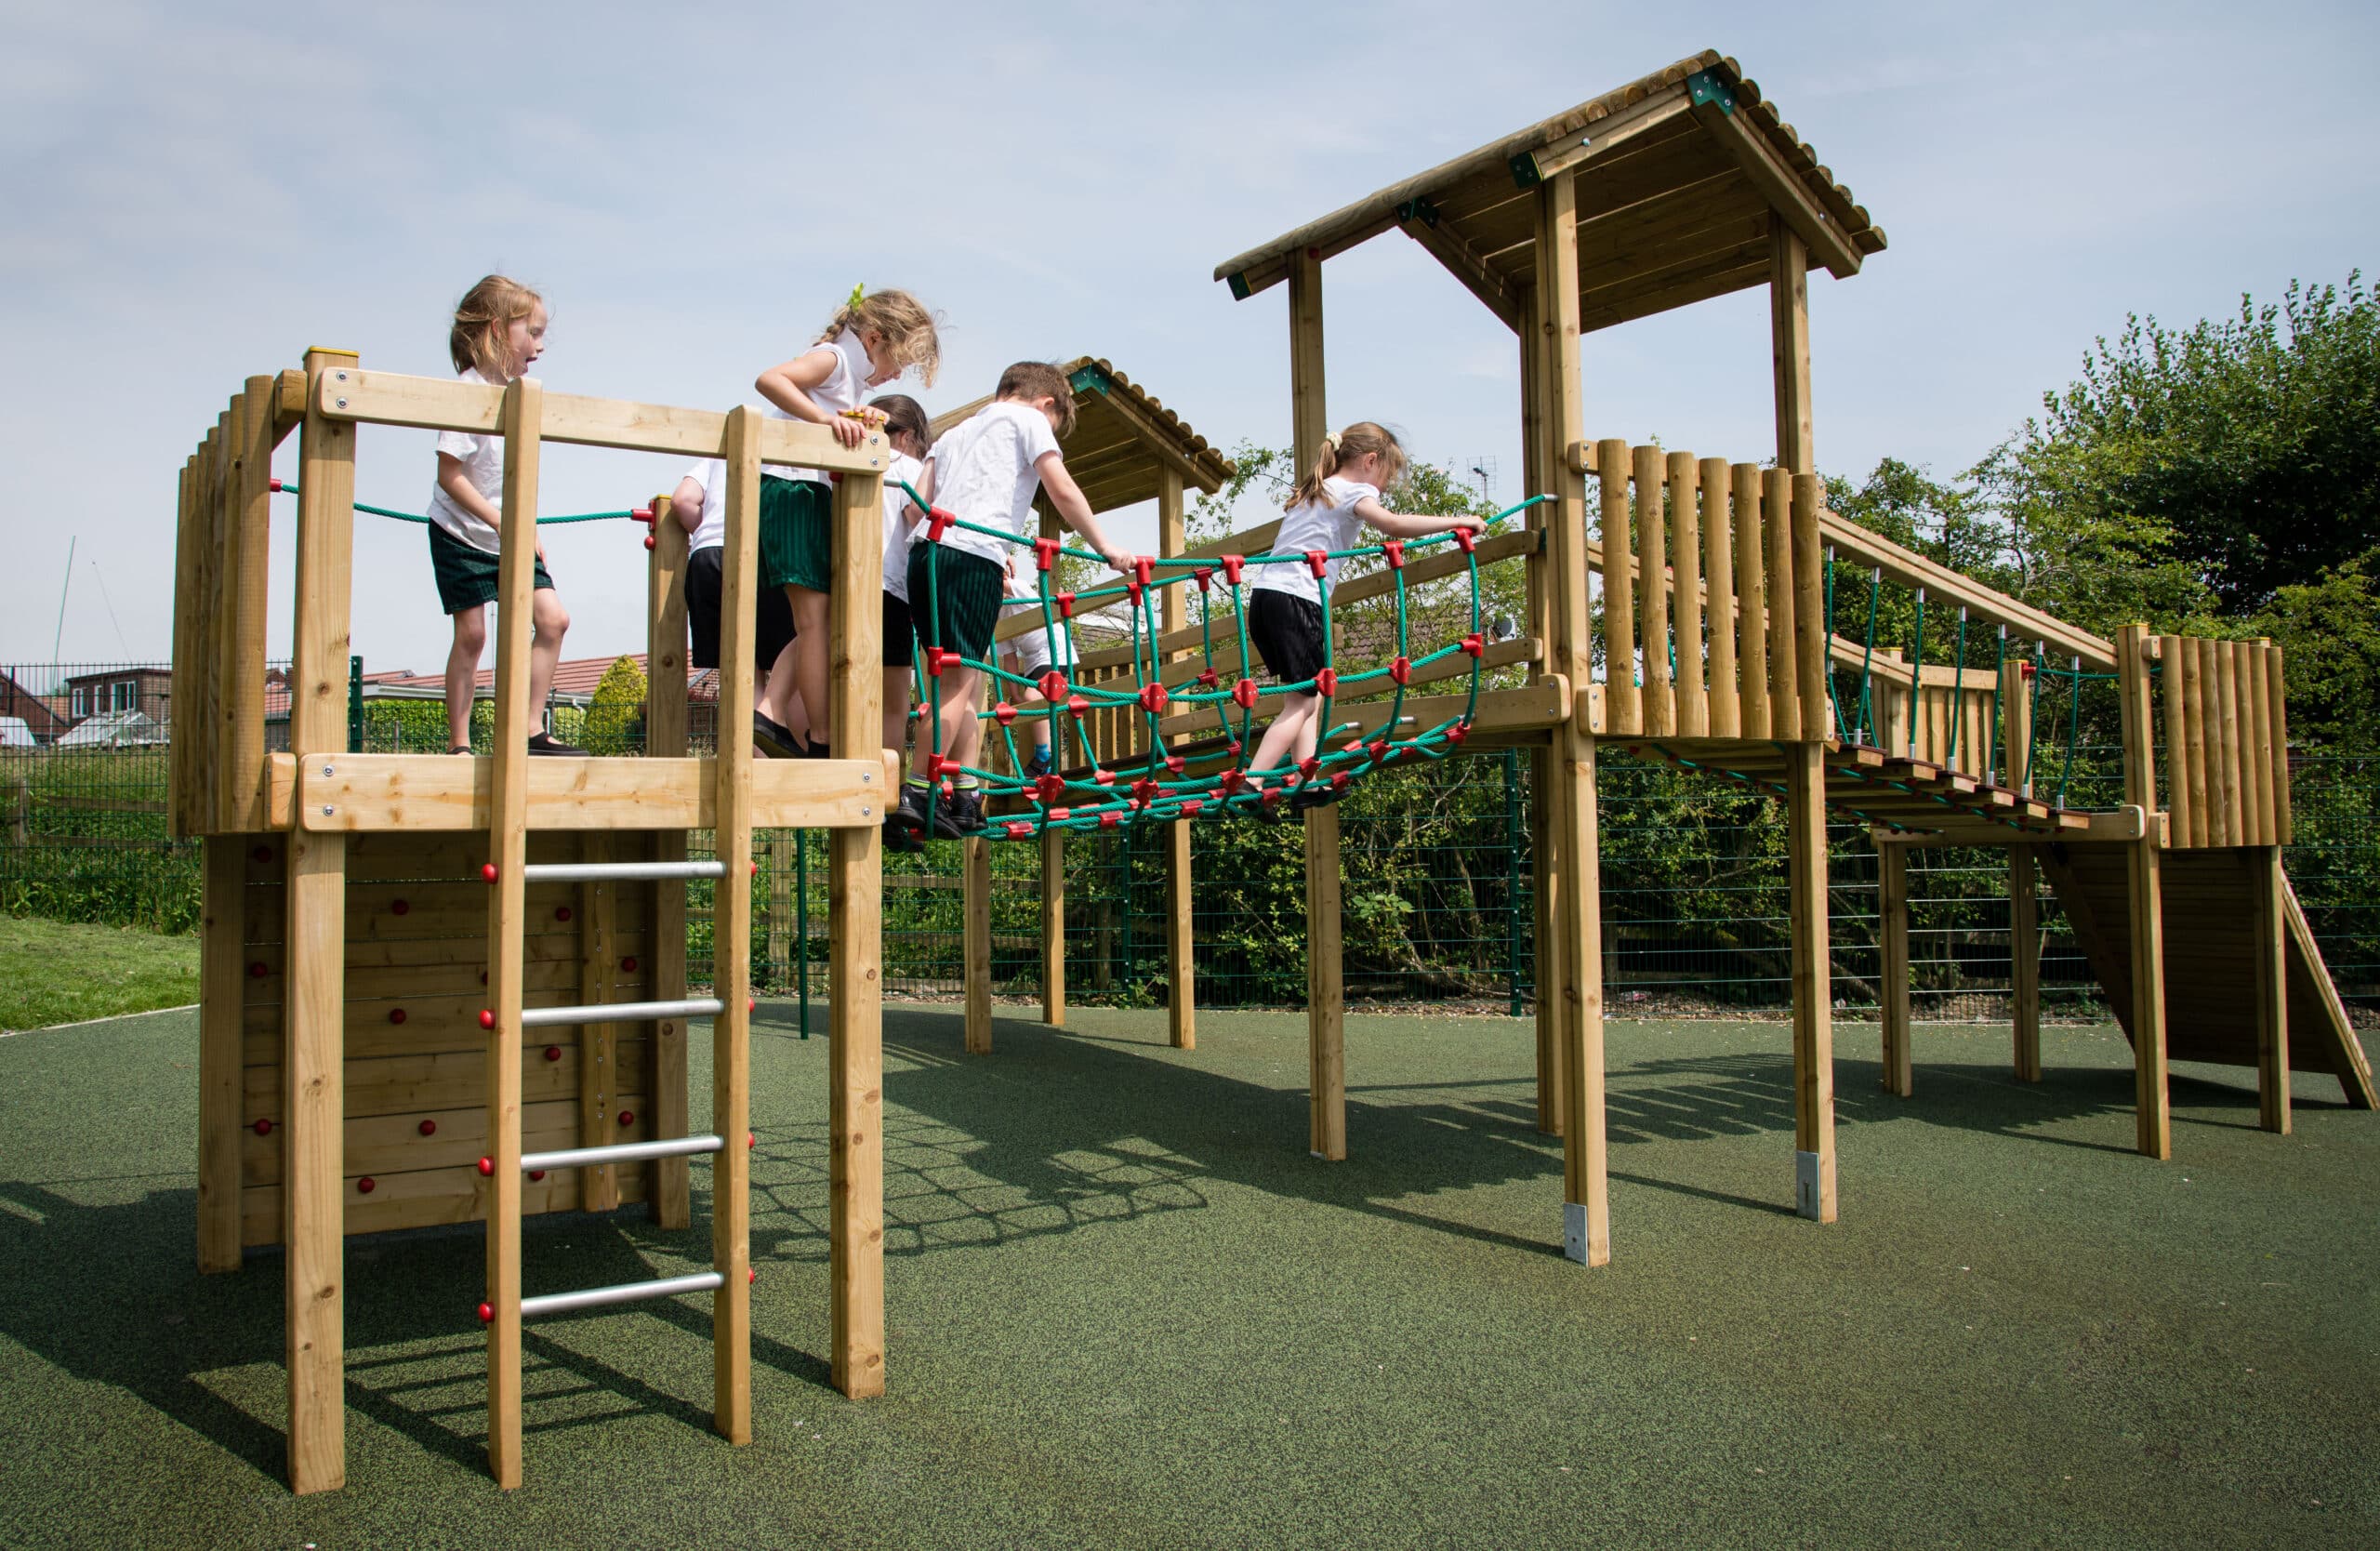 Four children in school uniforms cross a rope bridge on a playground tower